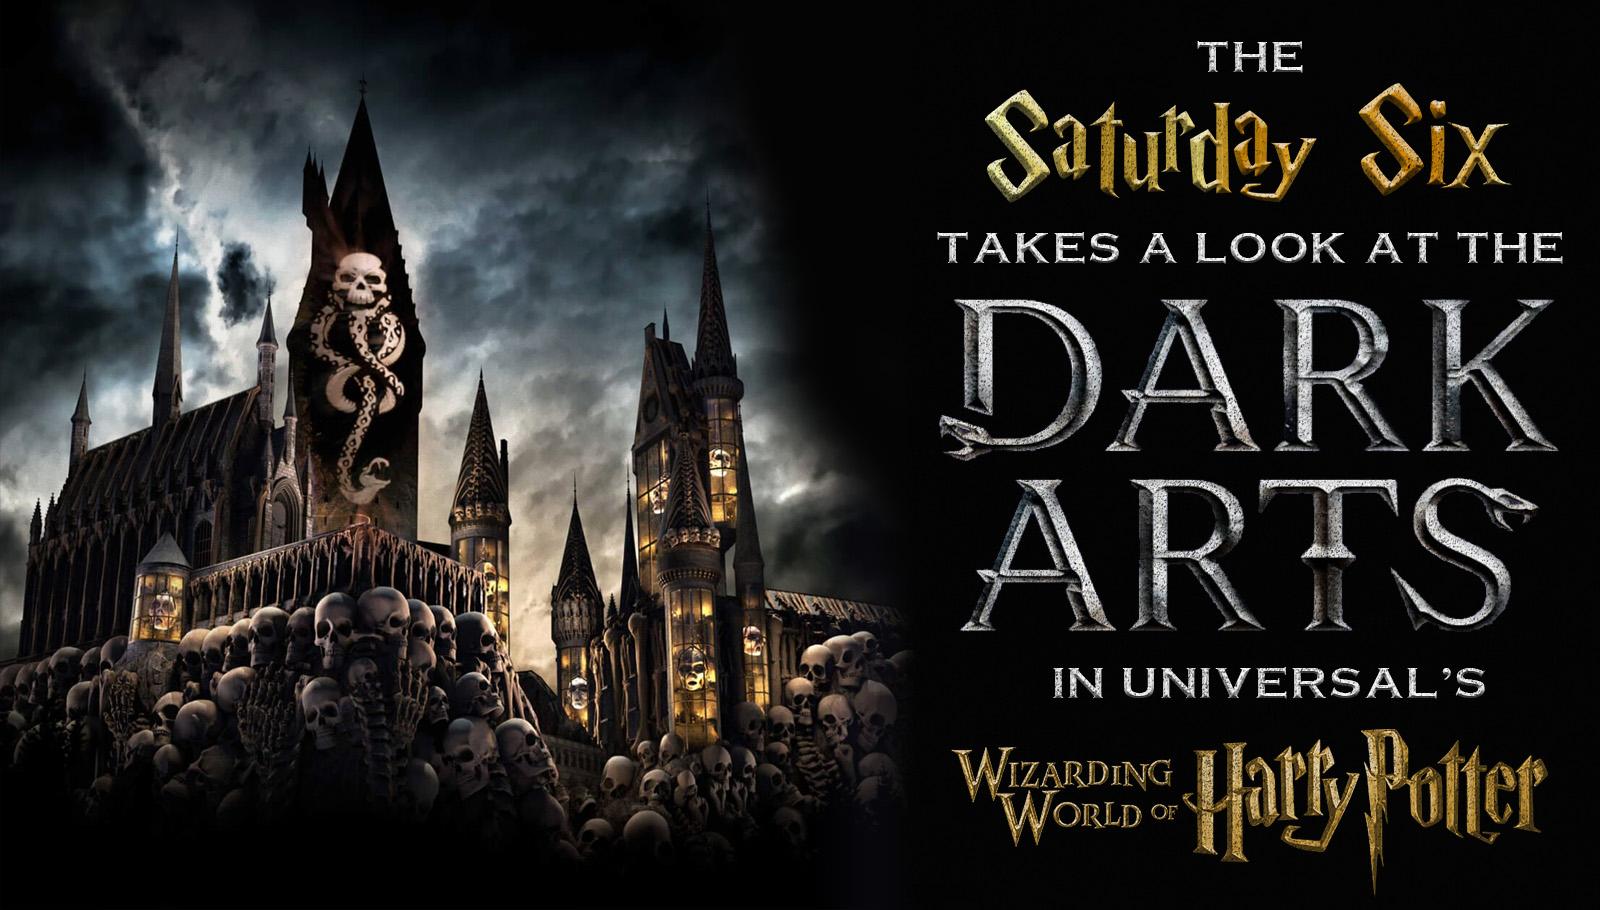 Harry Potter Movies: A Guide to the Dark Arts and Villains 2